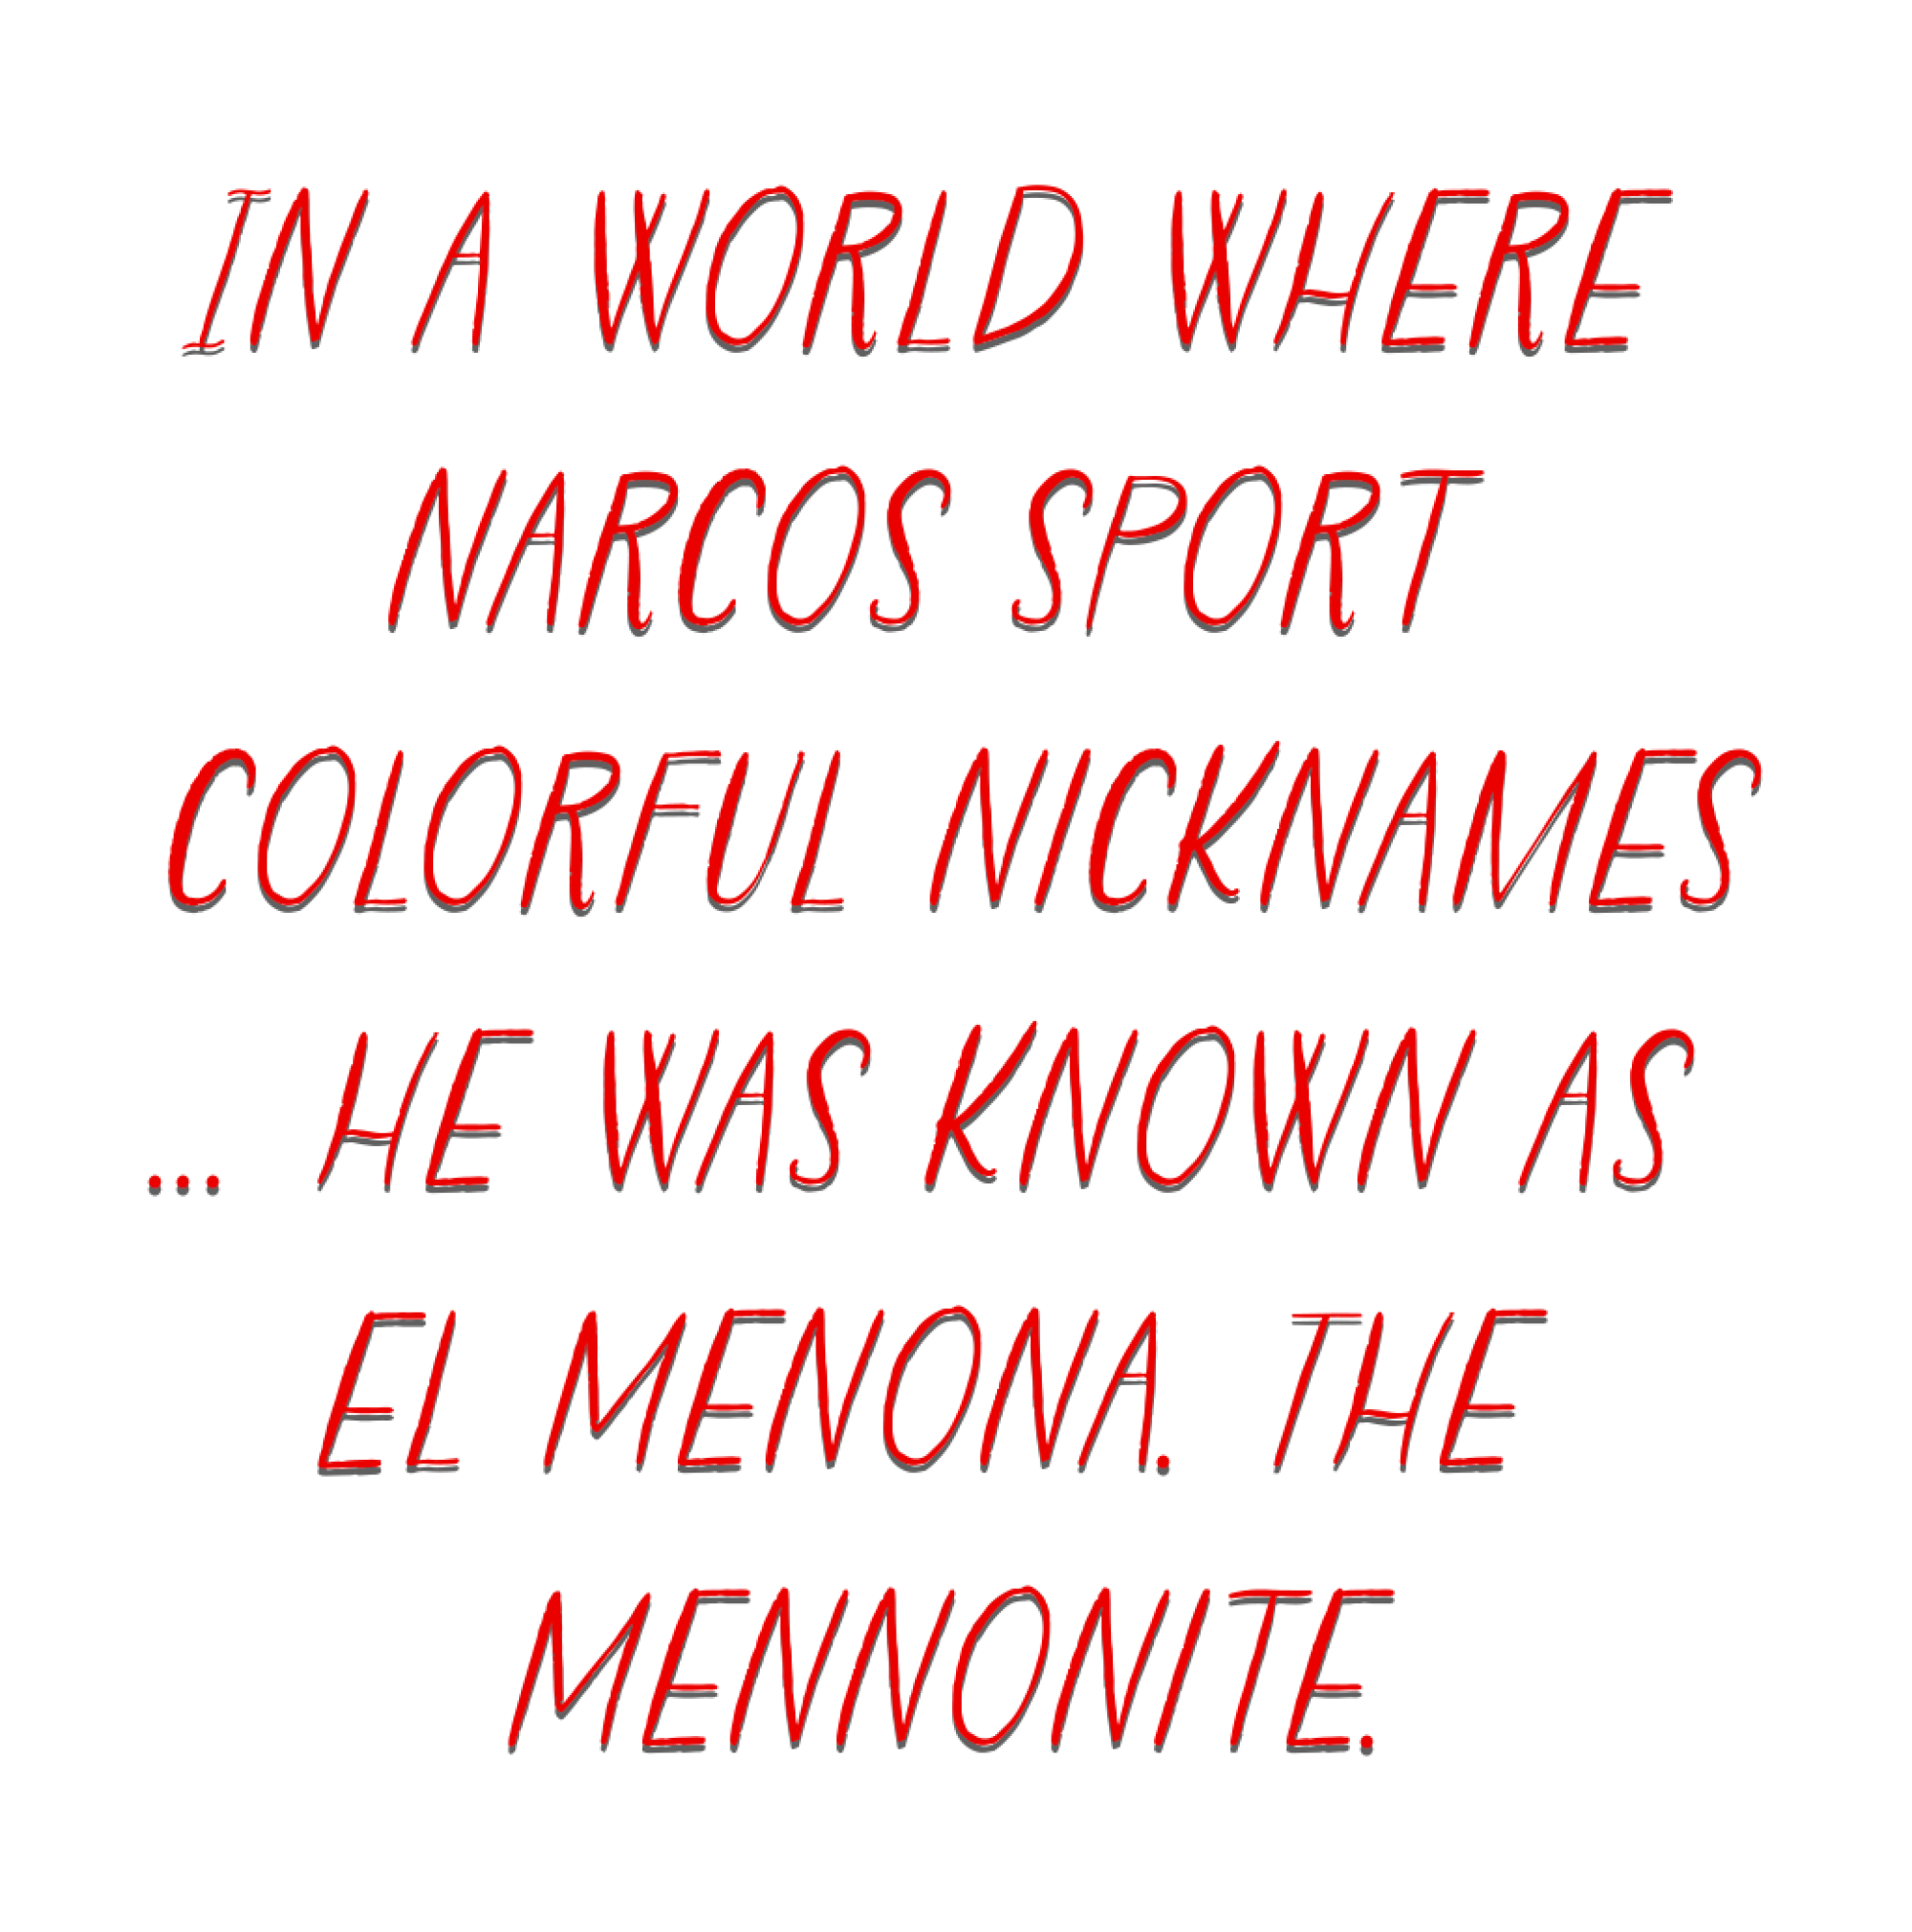 In a world where narcos sport colorful nicknames... he was known as El Menona. The Mennonite.